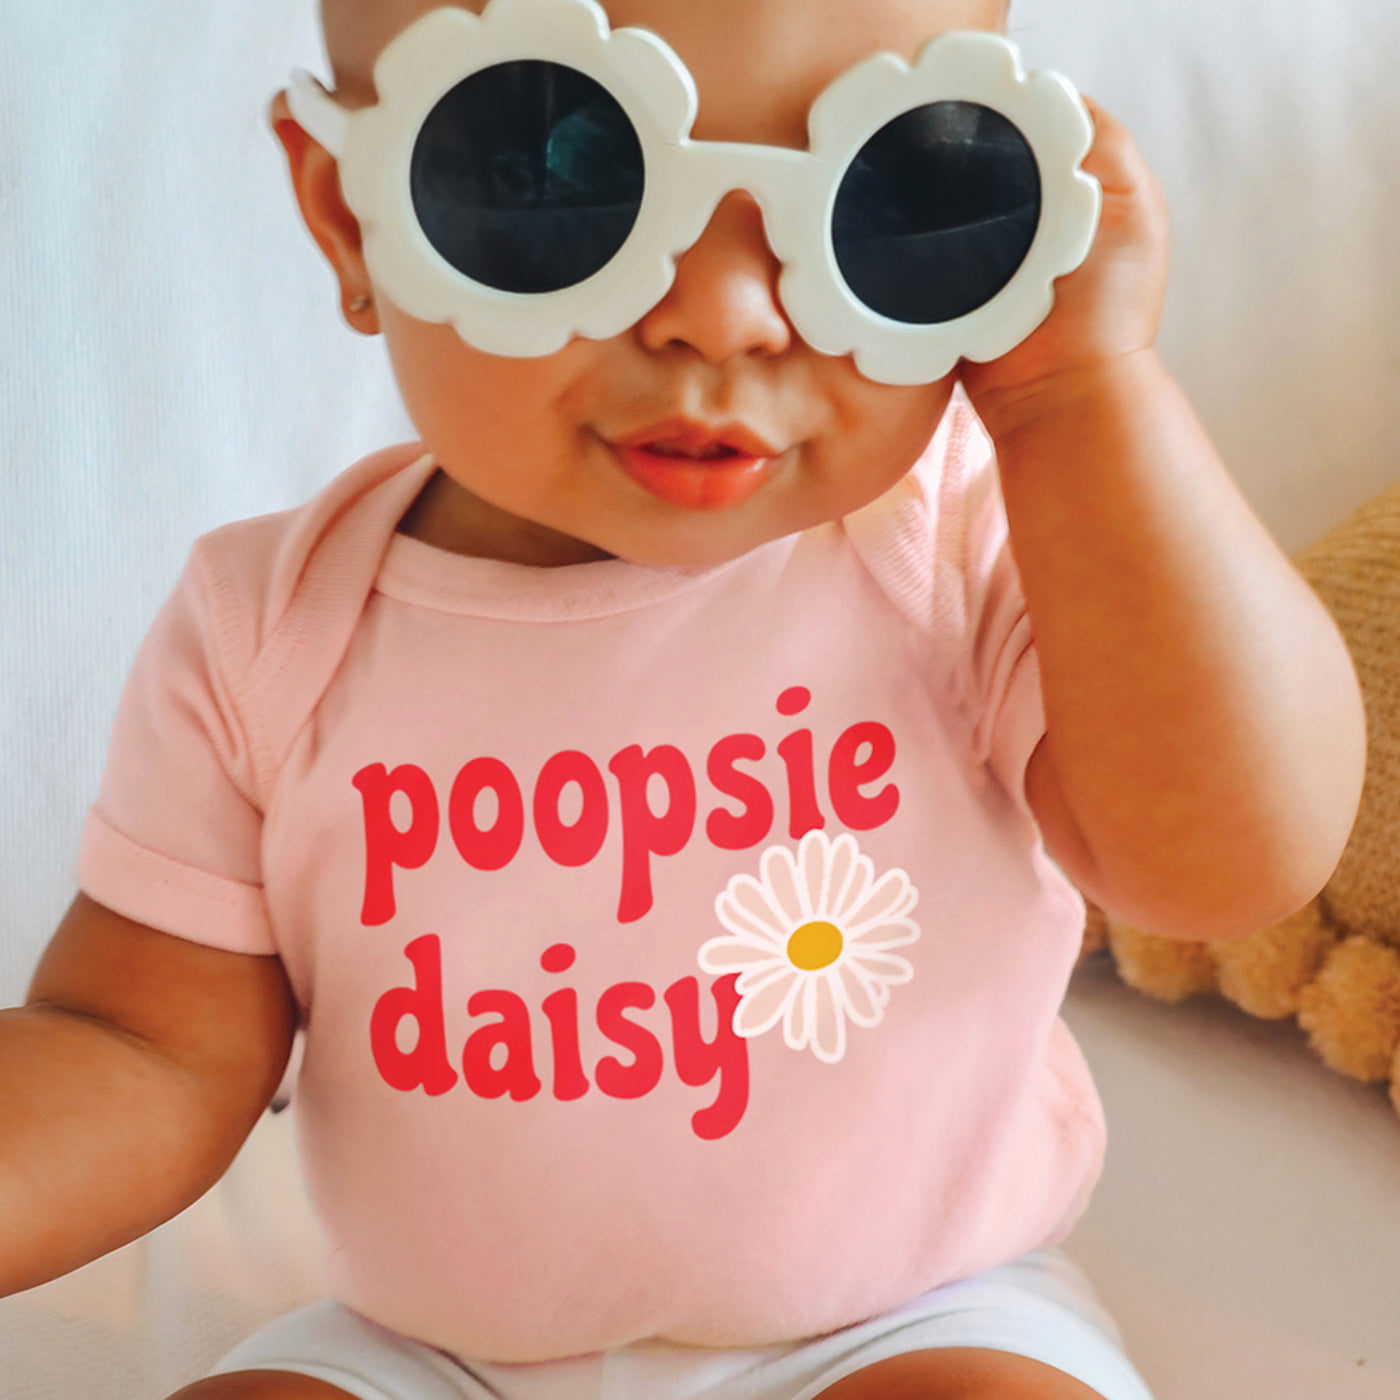 Little baby girl wearing short sleeve peach onesie with pink white and mustard yellow daisy flower and poopsie daisy text print, sitting on couch wearing cute white retro daisy sunglasses and posing 